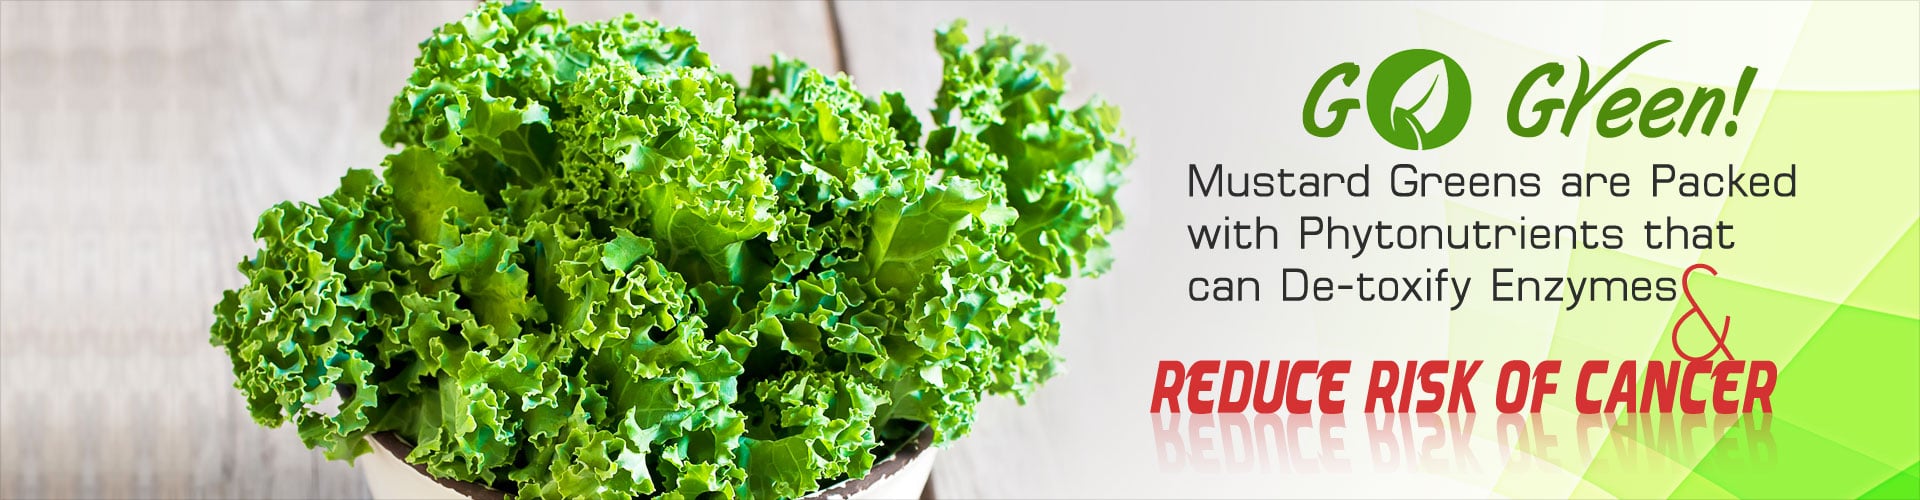 Go Green! Mustard greens are packed with phytonutrients that can de-toxify enzymes and reduce risk of cancer.